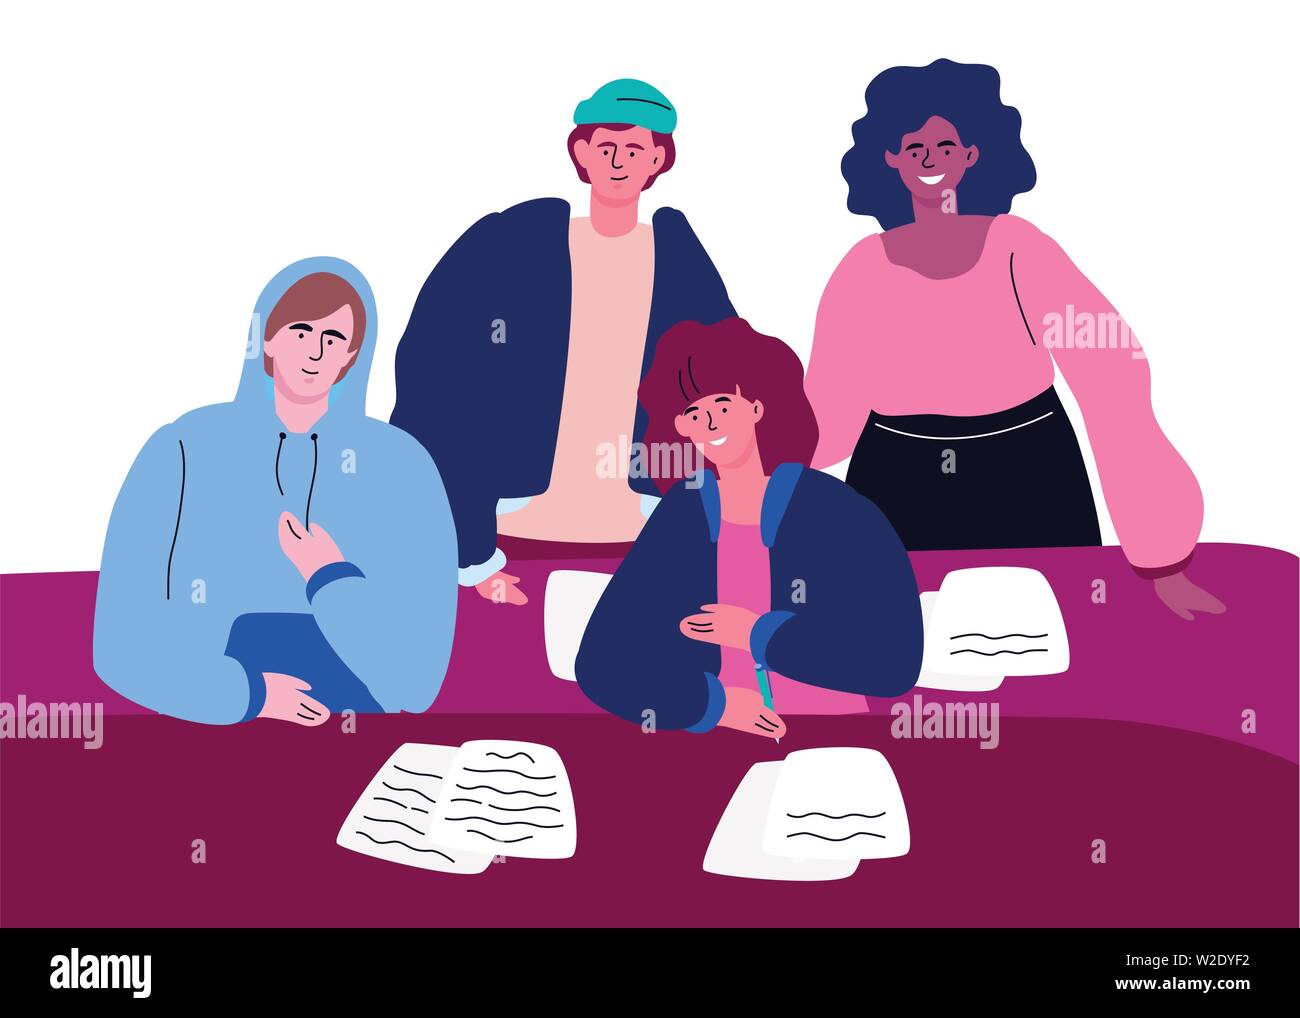 Students on a lesson - colorful flat design style illustration Stock Vector